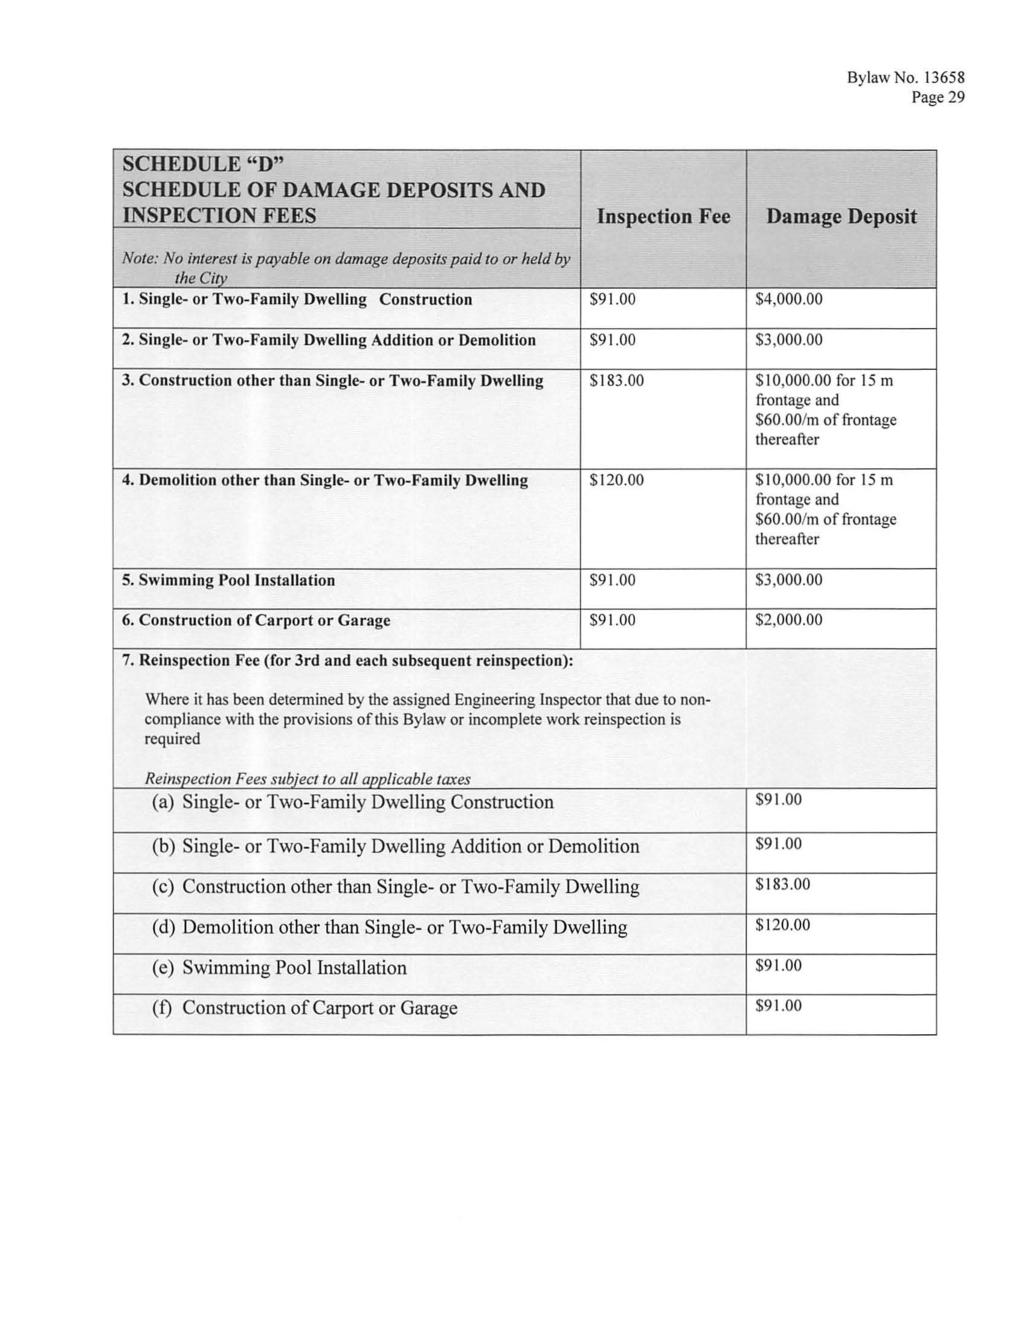 Page 29 SCHEDULE "D" SCHEDULE OF DAMAGE DEPOSITS AND INSPECTION FEES Inspection Fee Damage Deposit Note: No interest is payable on damage deposits paid to or held by the Ci/J! 1.